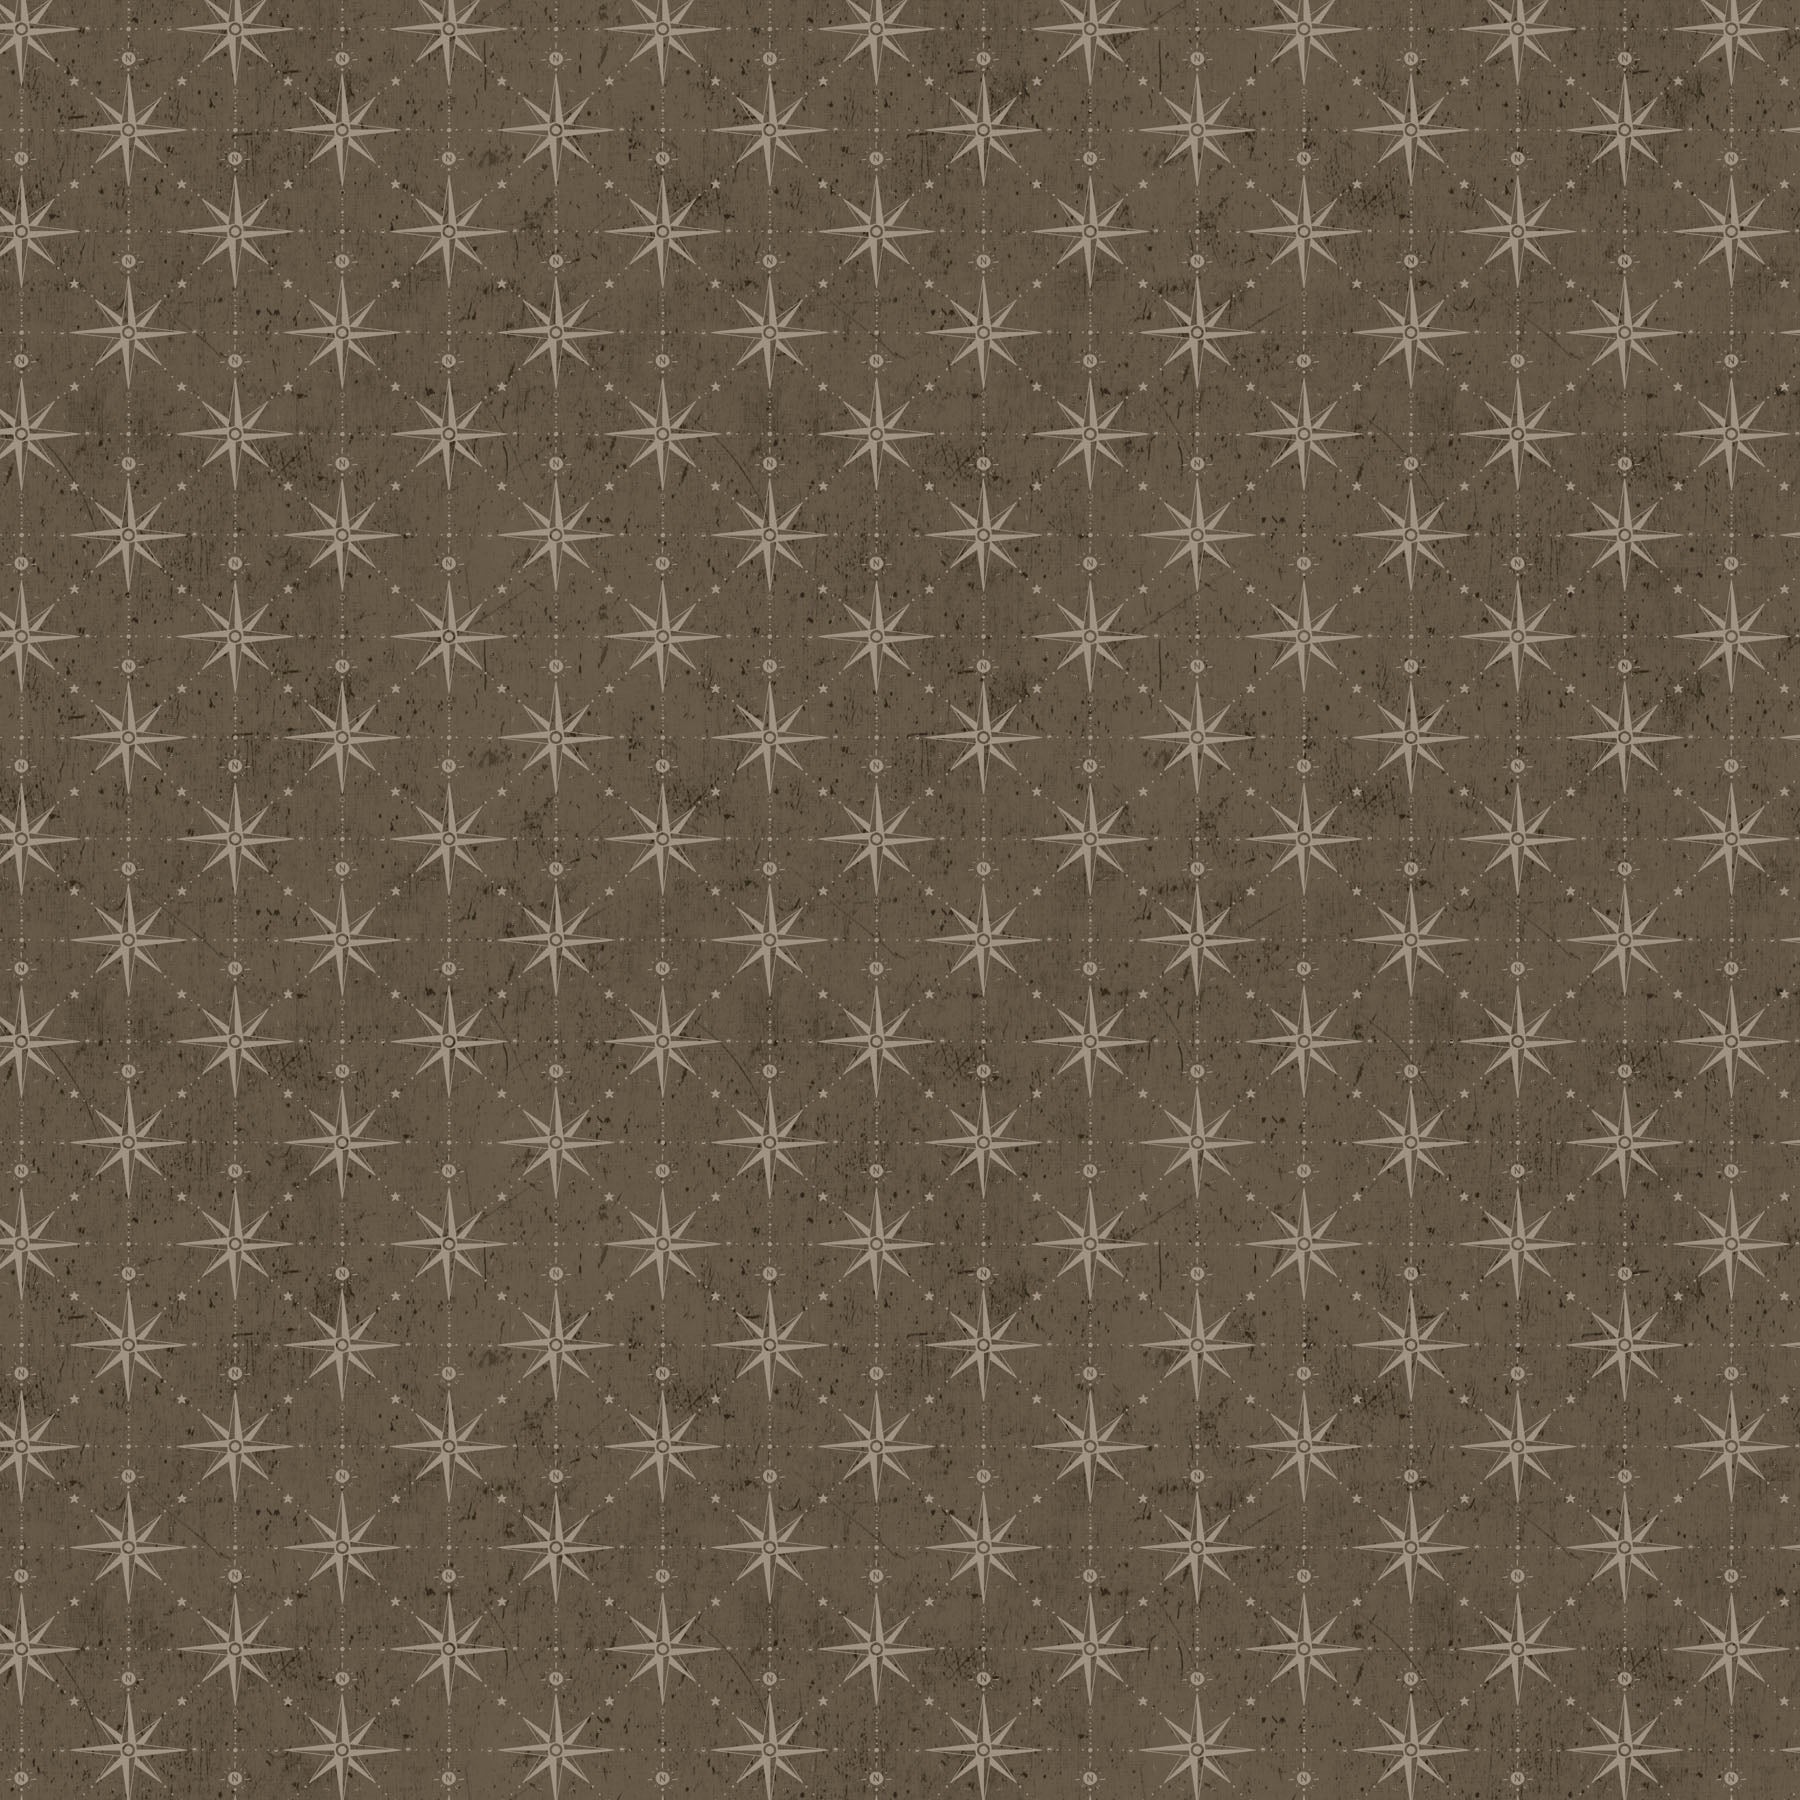 Fabric, Great Journey, Compass Brown 90789-32